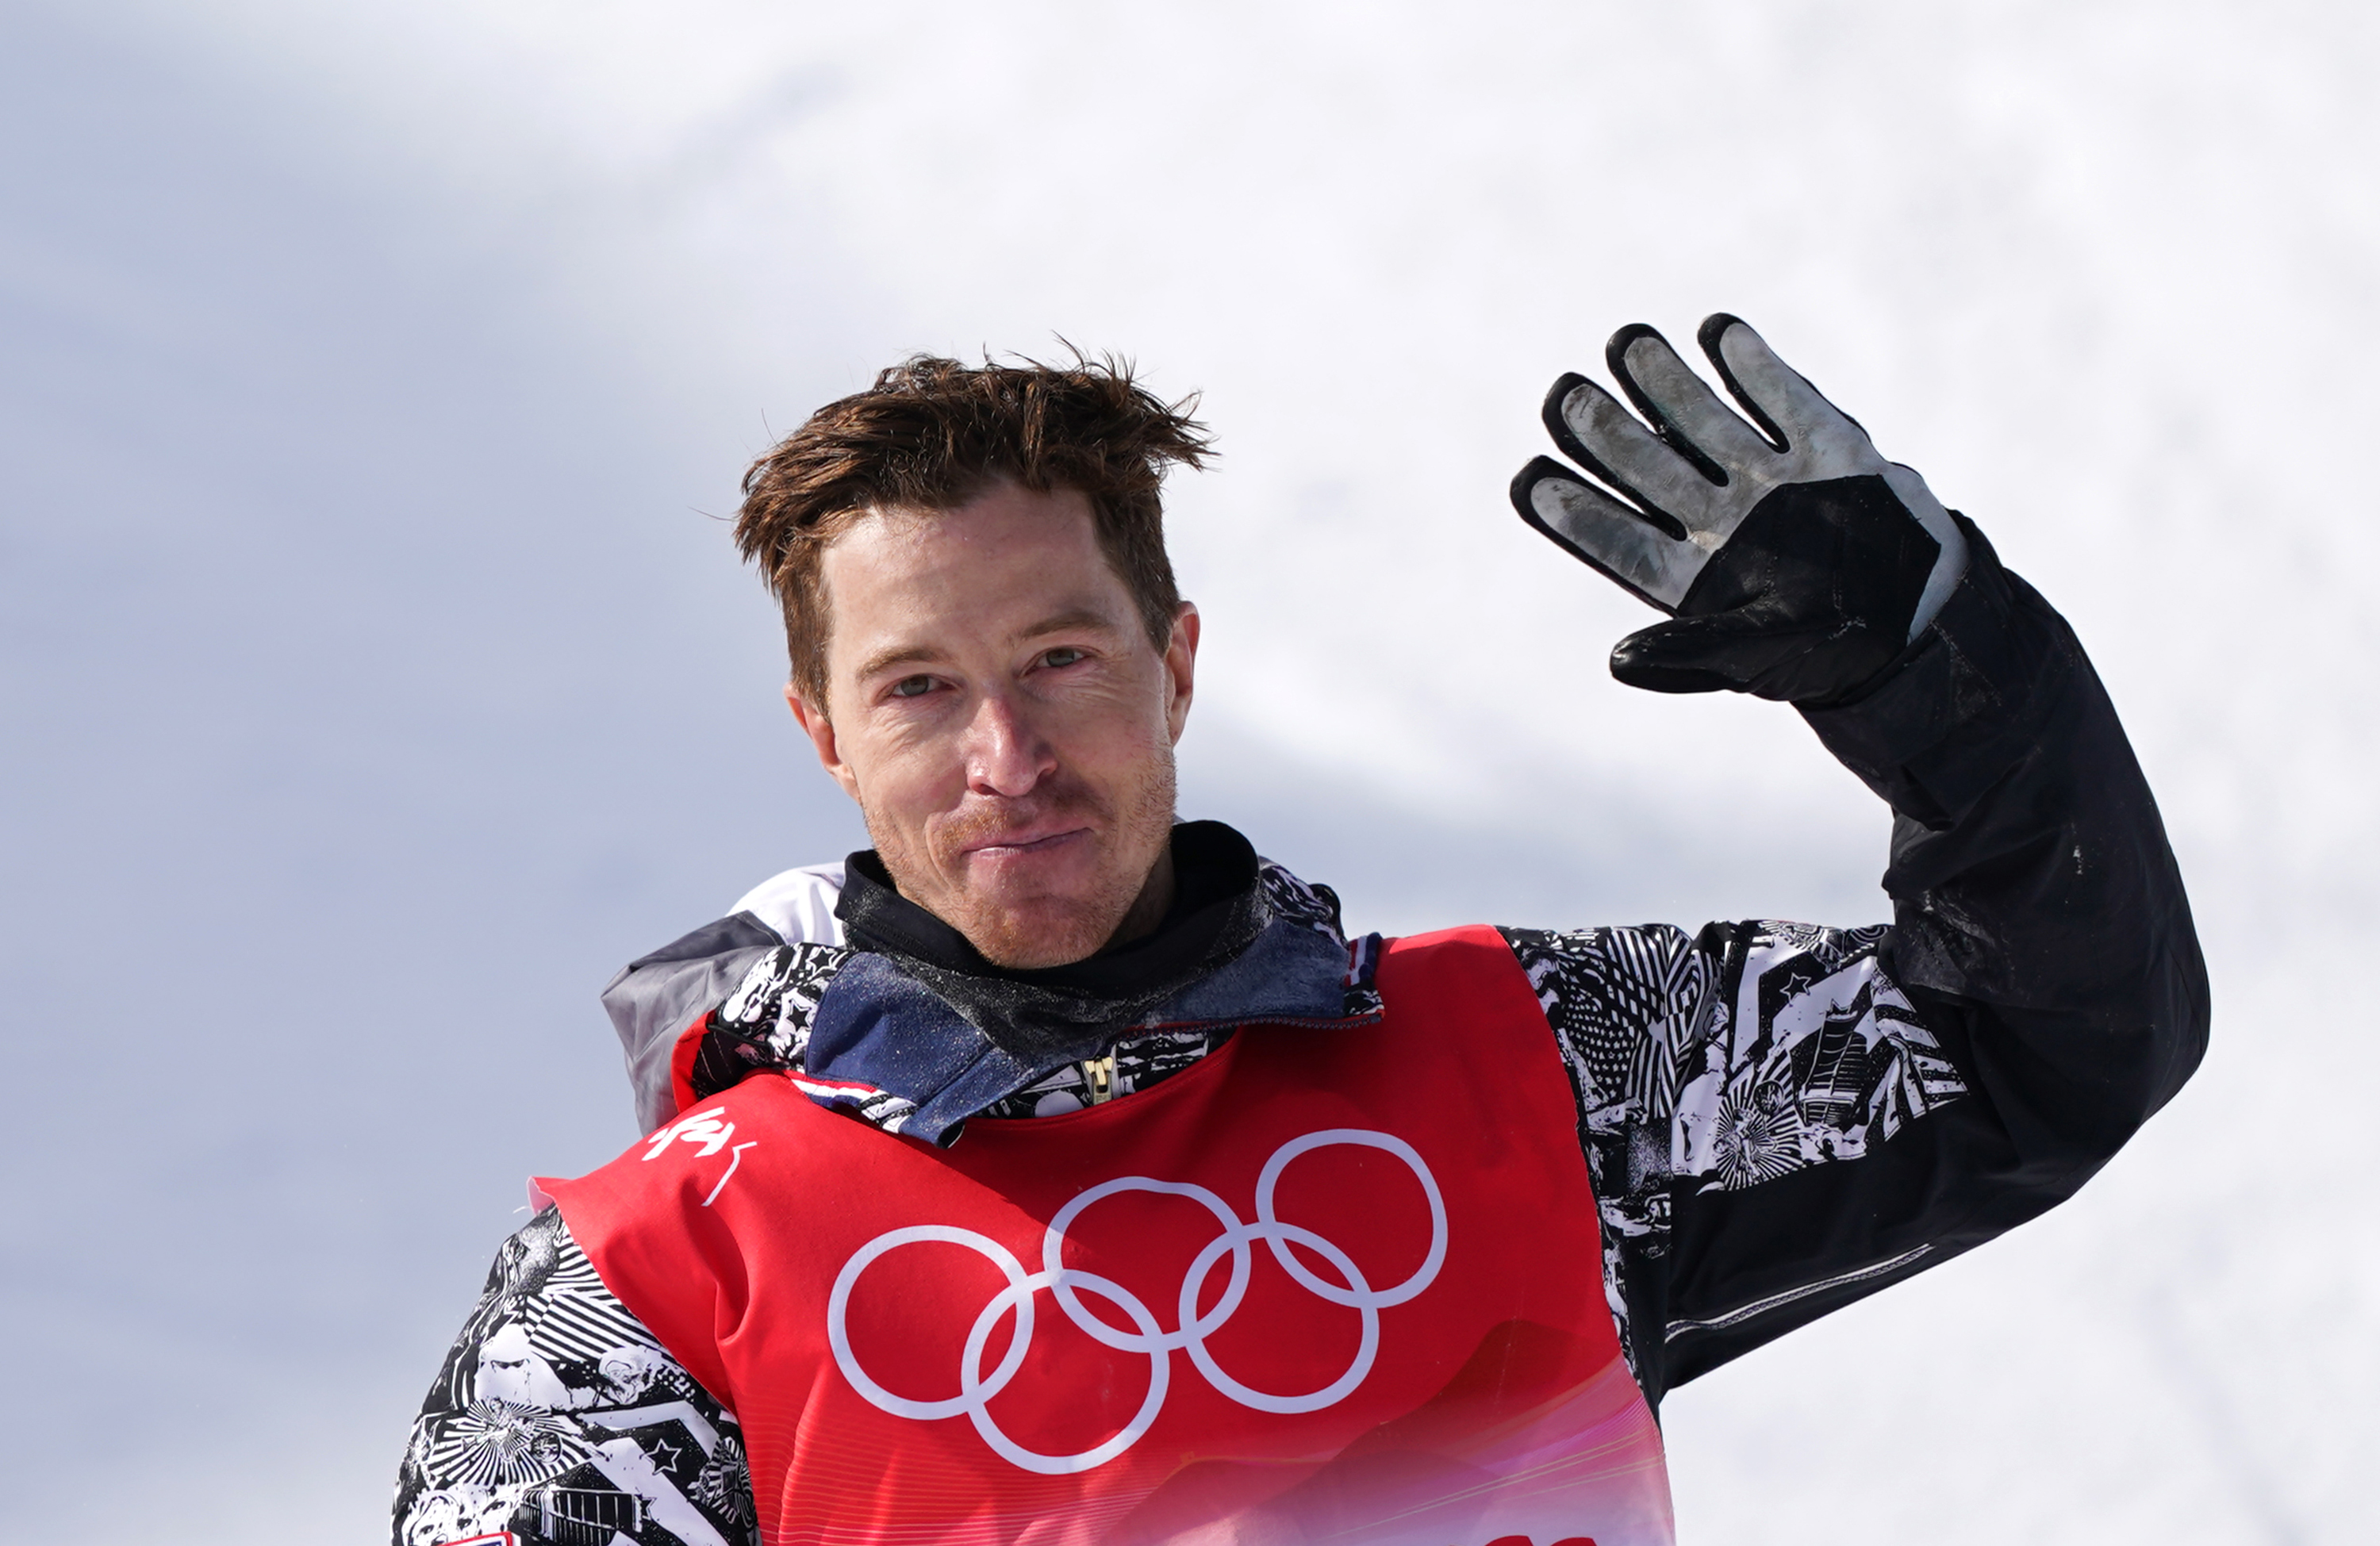 Shaun White finishes 4th in Olympic farewell